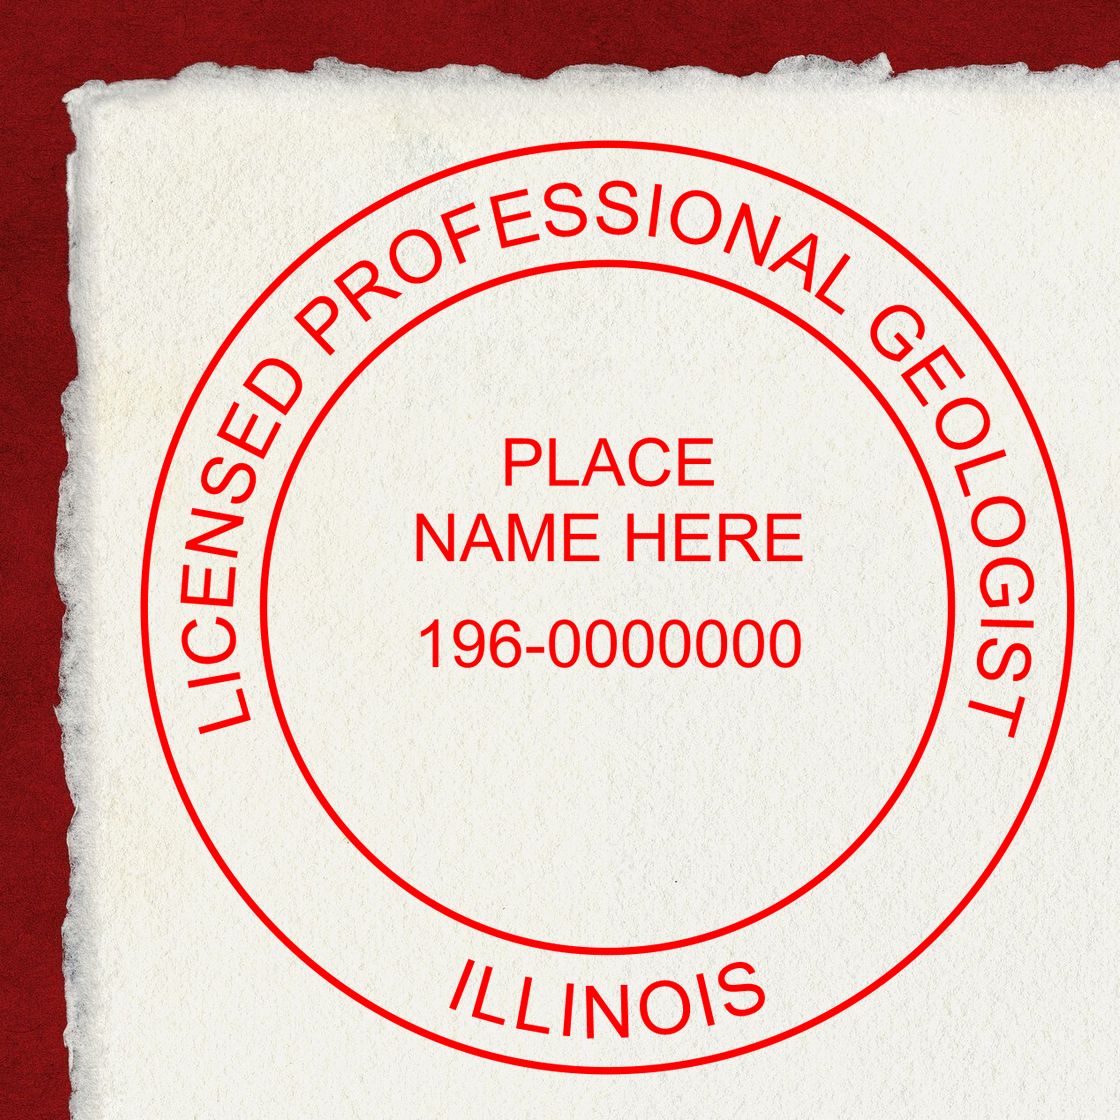 Another Example of a stamped impression of the Self-Inking Illinois Geologist Stamp on a office form